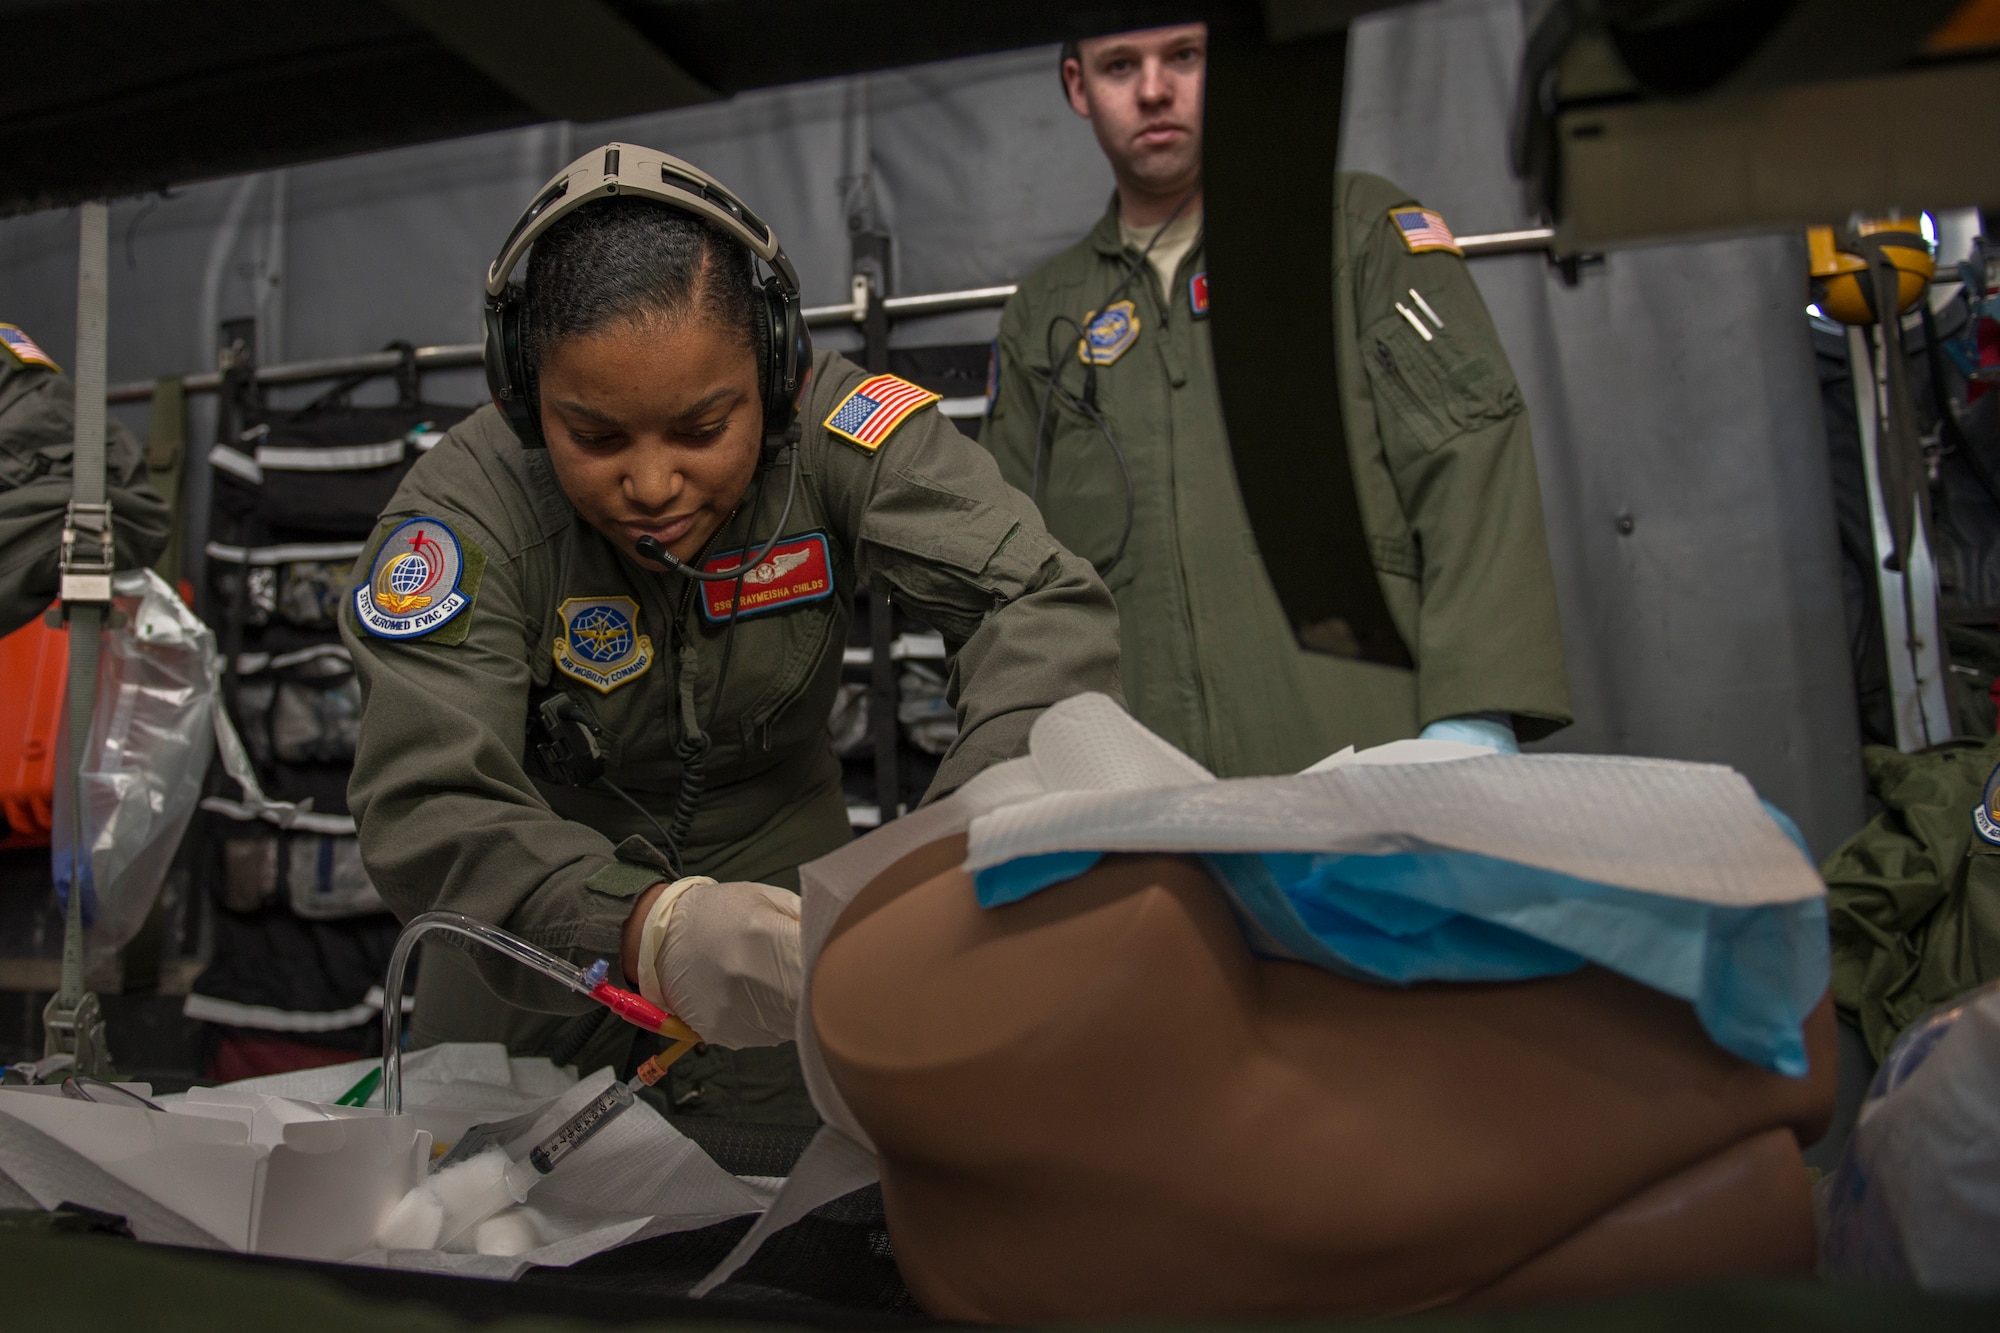 Staff Sgt. Raymeisha Childs, 375th Aeromedical Evacuation Squadron technician, places a catheter in a mannequin during training in a simulated C-130 Hercules fuselage Jan. 28, 2016, Scott Air Force Base, Illinois. The fuselage provides the 375th AES the opportunity to accomplish 50 percent of their required semi-annual training. (U.S. Air Force photo by Airman 1st Class Melissa Estevez)